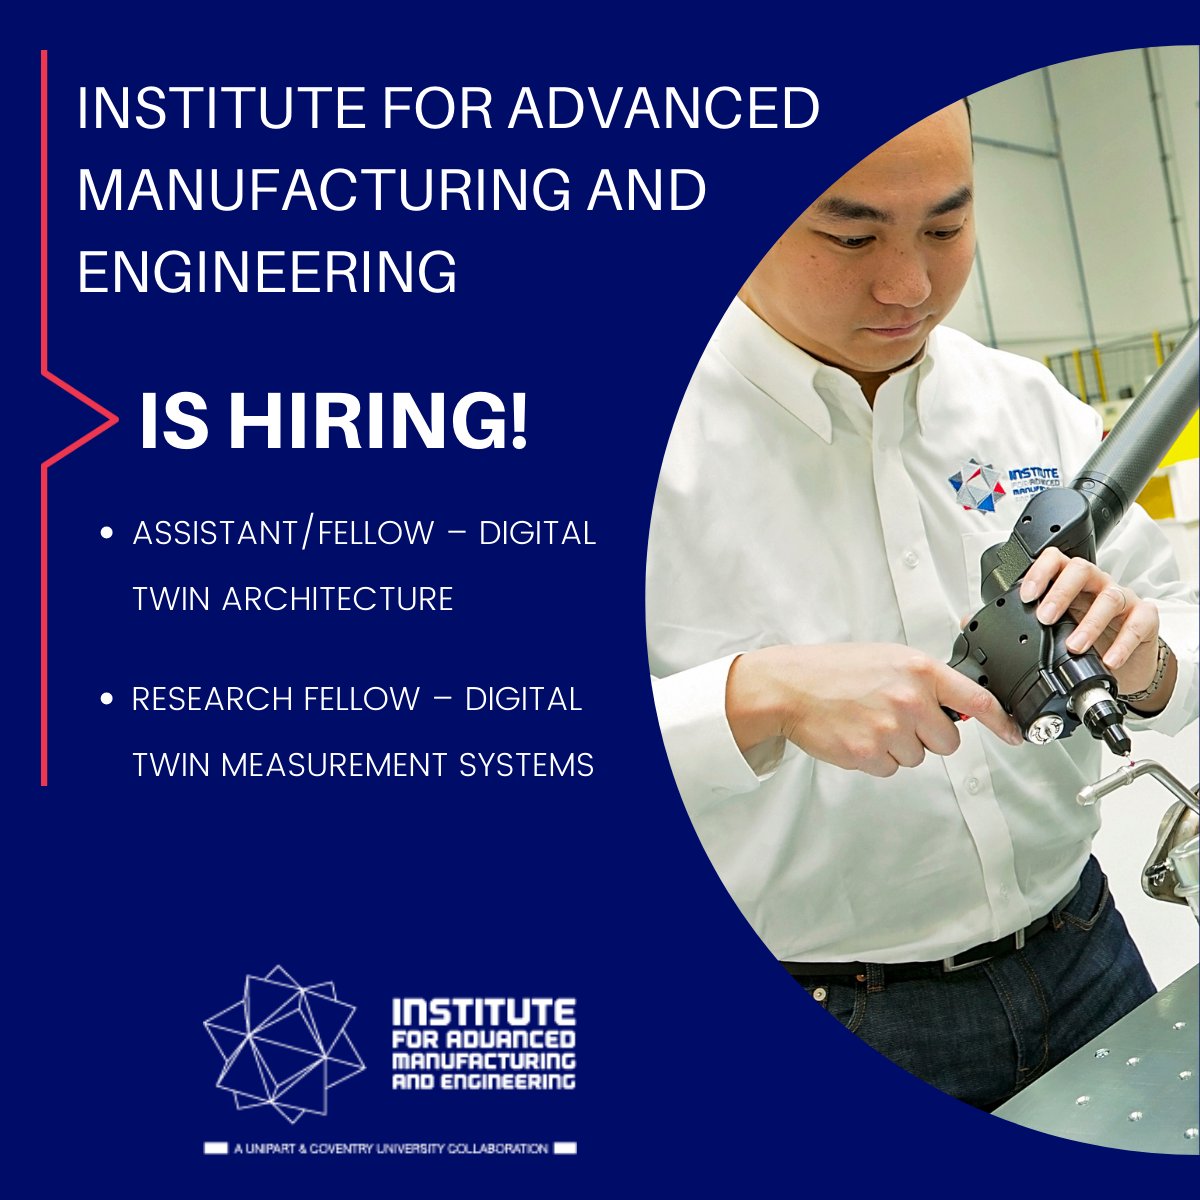 Looking for a career in #Digital #Manufacturing? Our @ame_uk is #hiring ! > Research Fellow–Digital Twin Measurement Systems Apply here: bit.ly/3qks2Jp > Assistant/Fellow–Digital Twin Architecture Apply here: bit.ly/3qnHNj7 #digitalmanufacturing #opportunity